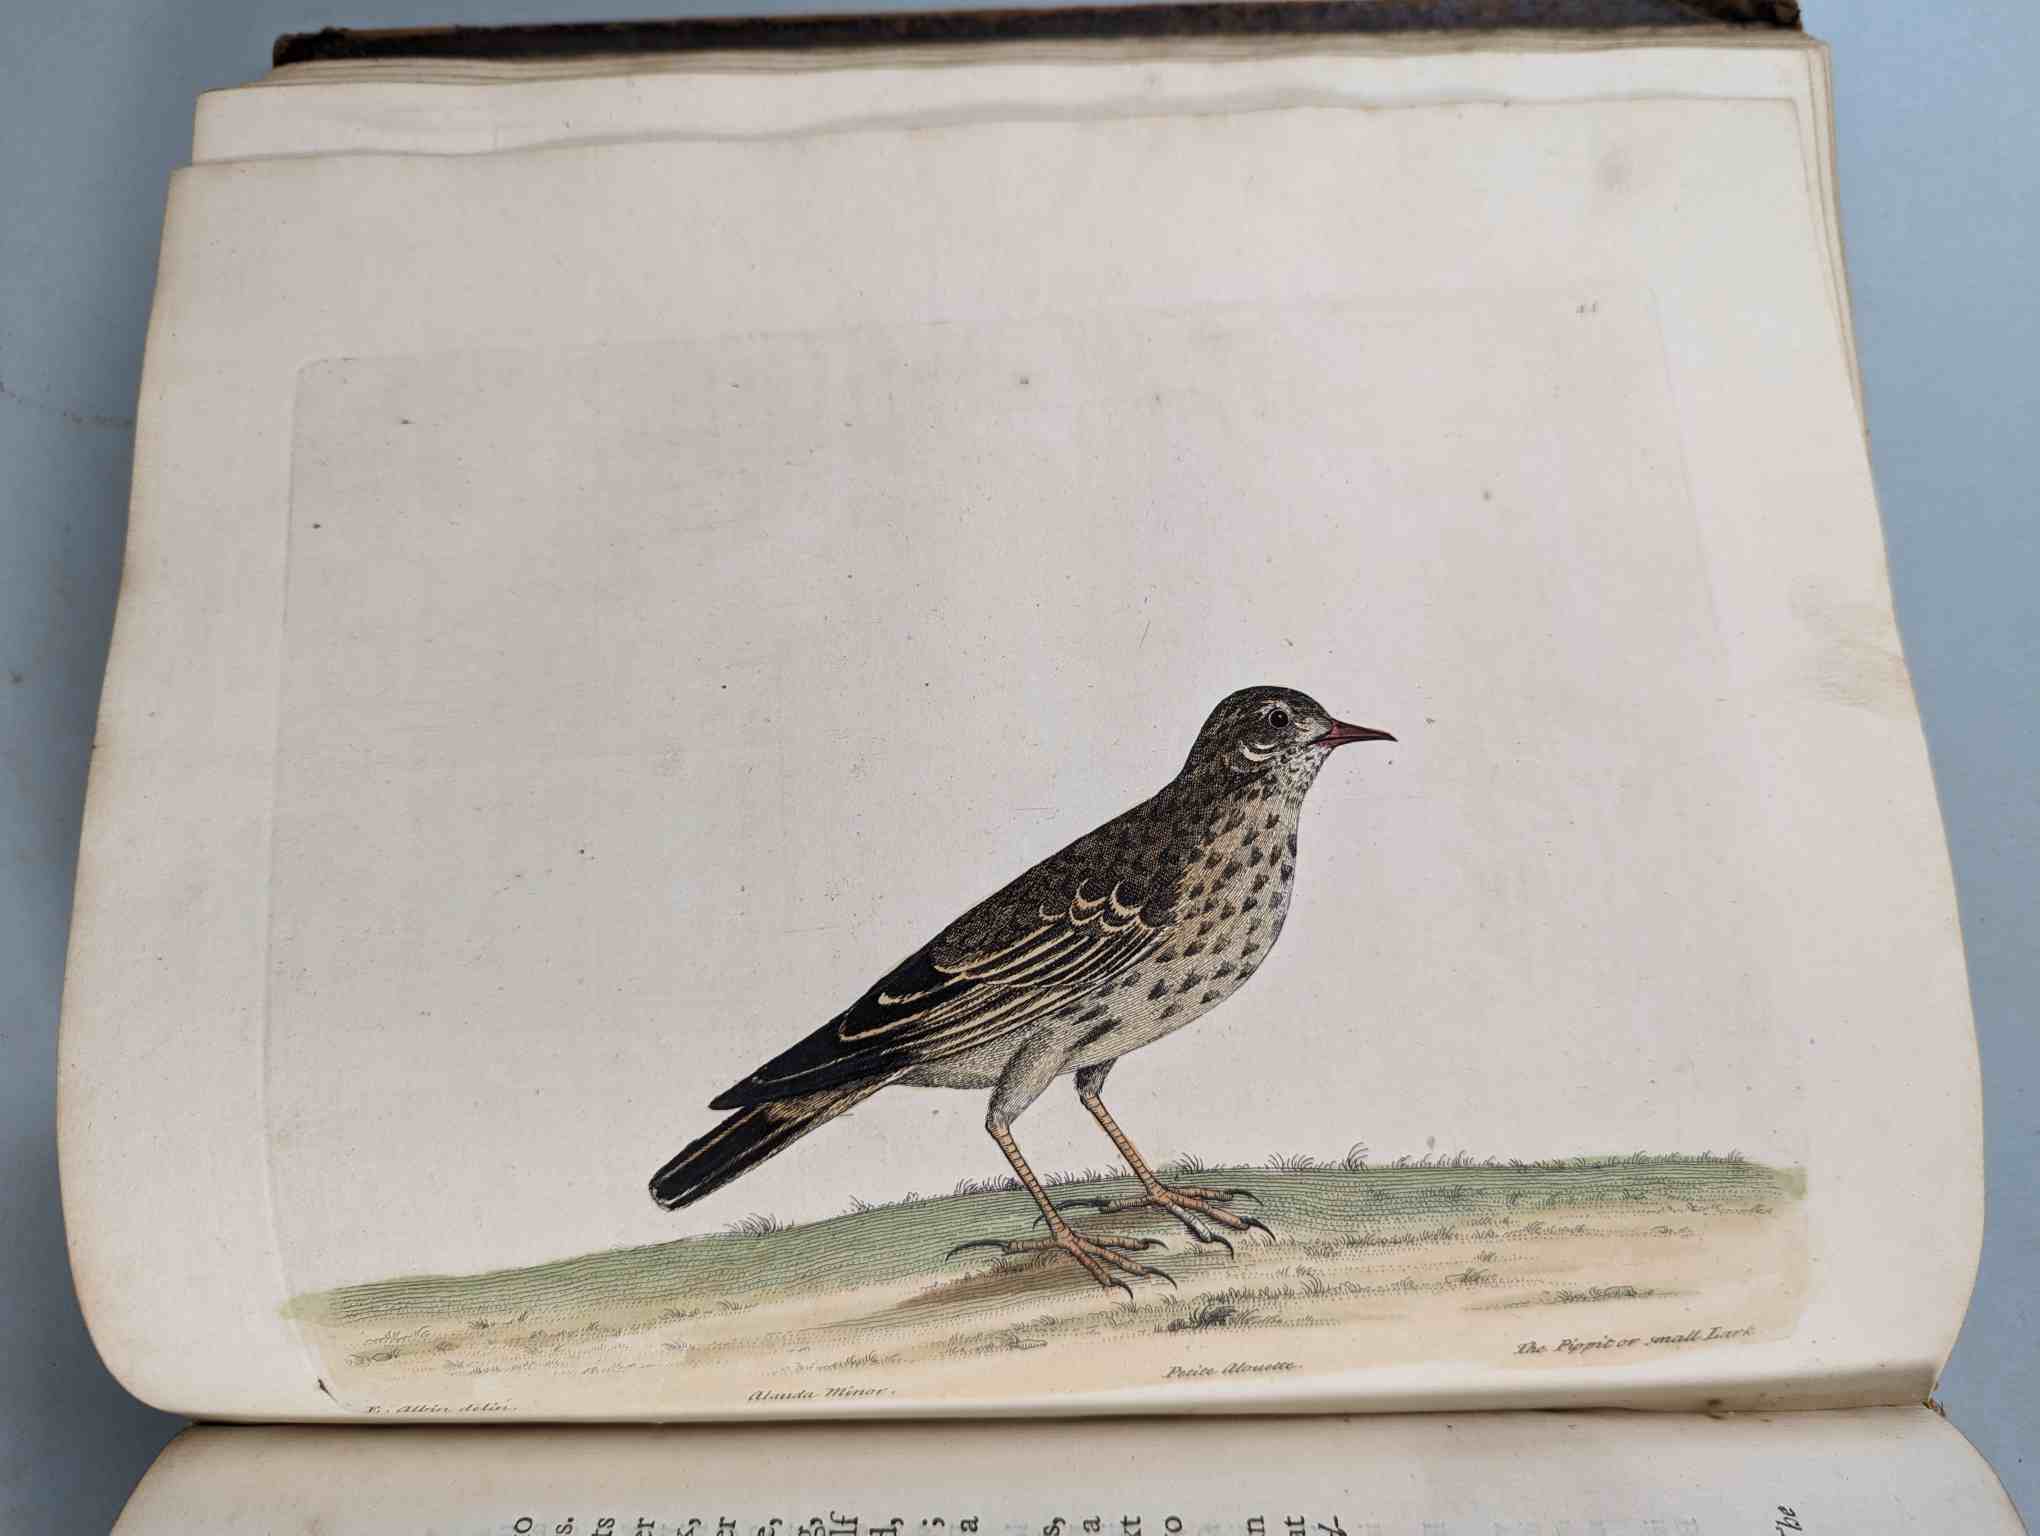 ALBIN, Eleazar. A Natural History of Birds, to which are added, Notes and Observations by W. - Image 47 of 208